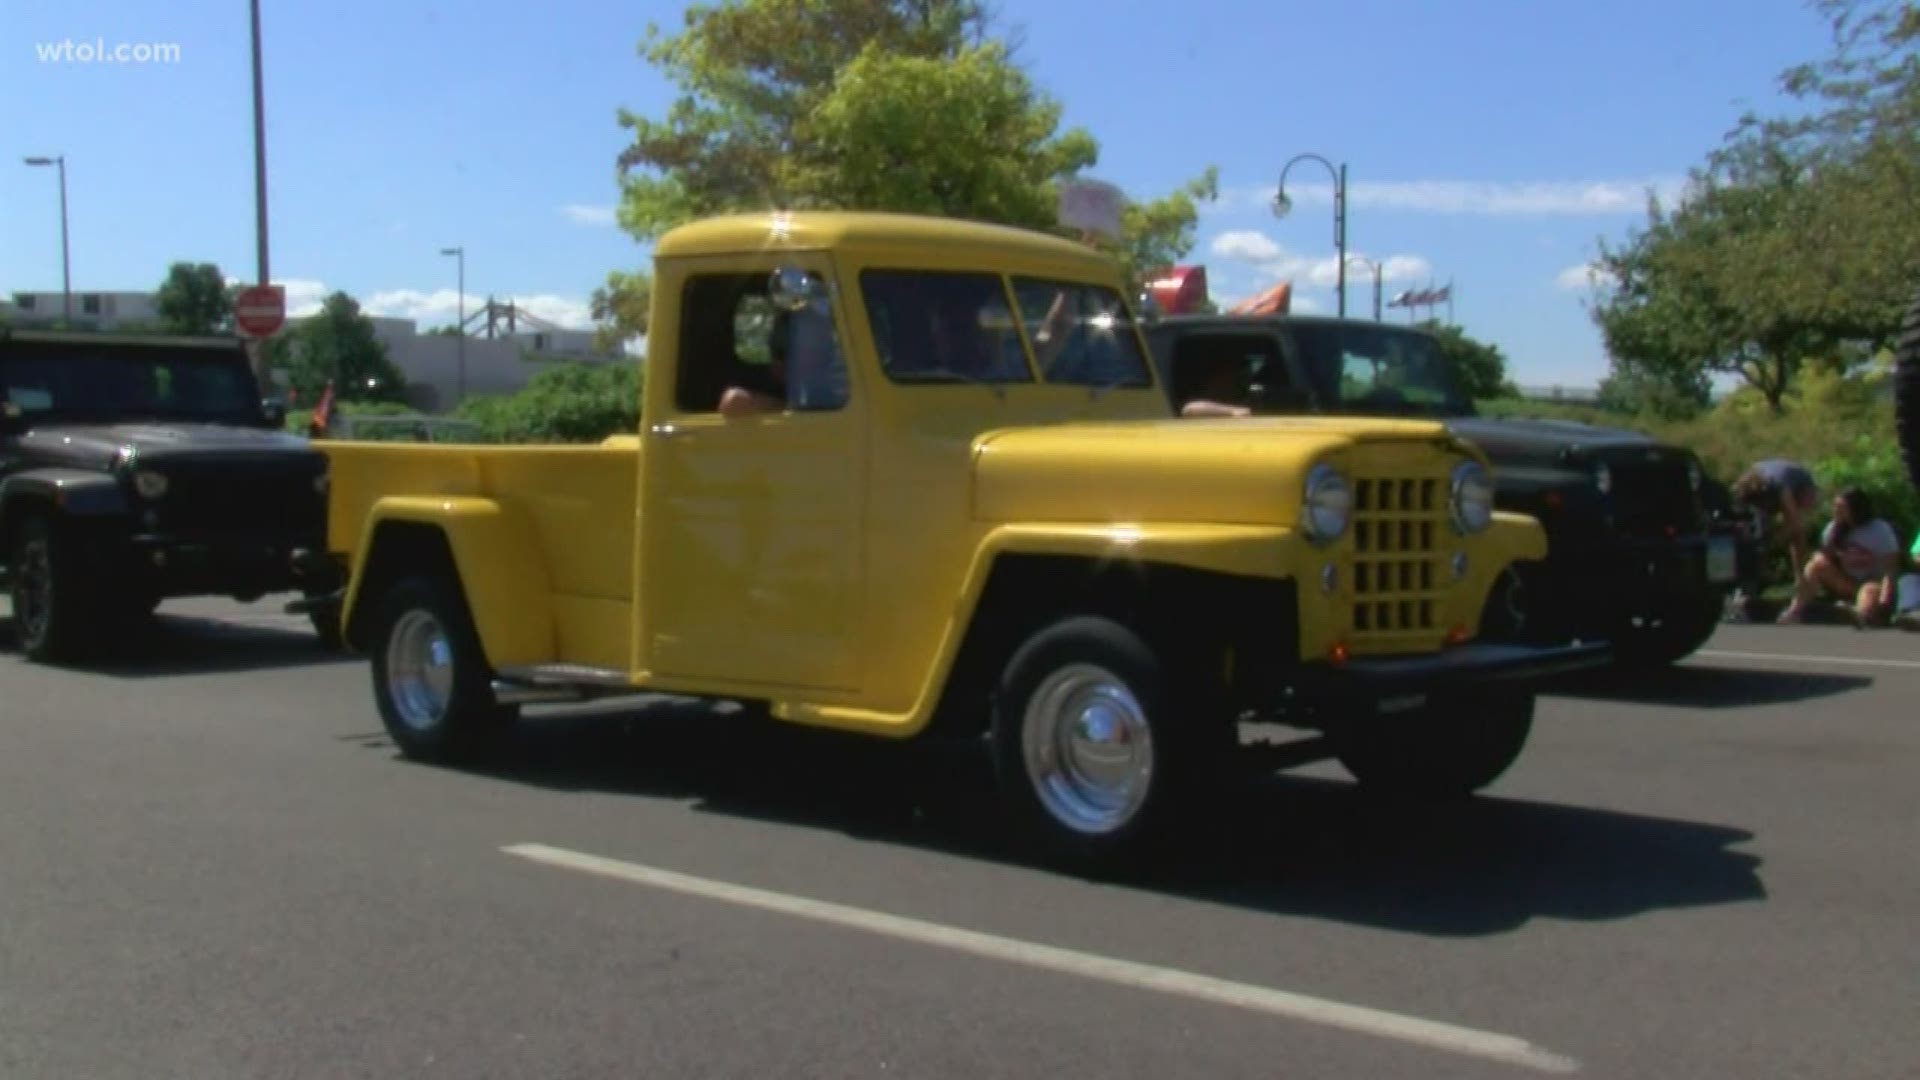 It wasn't just any celebration in downtown Toledo Saturday. This one involved some sweet rides that  celebrated Jeep.